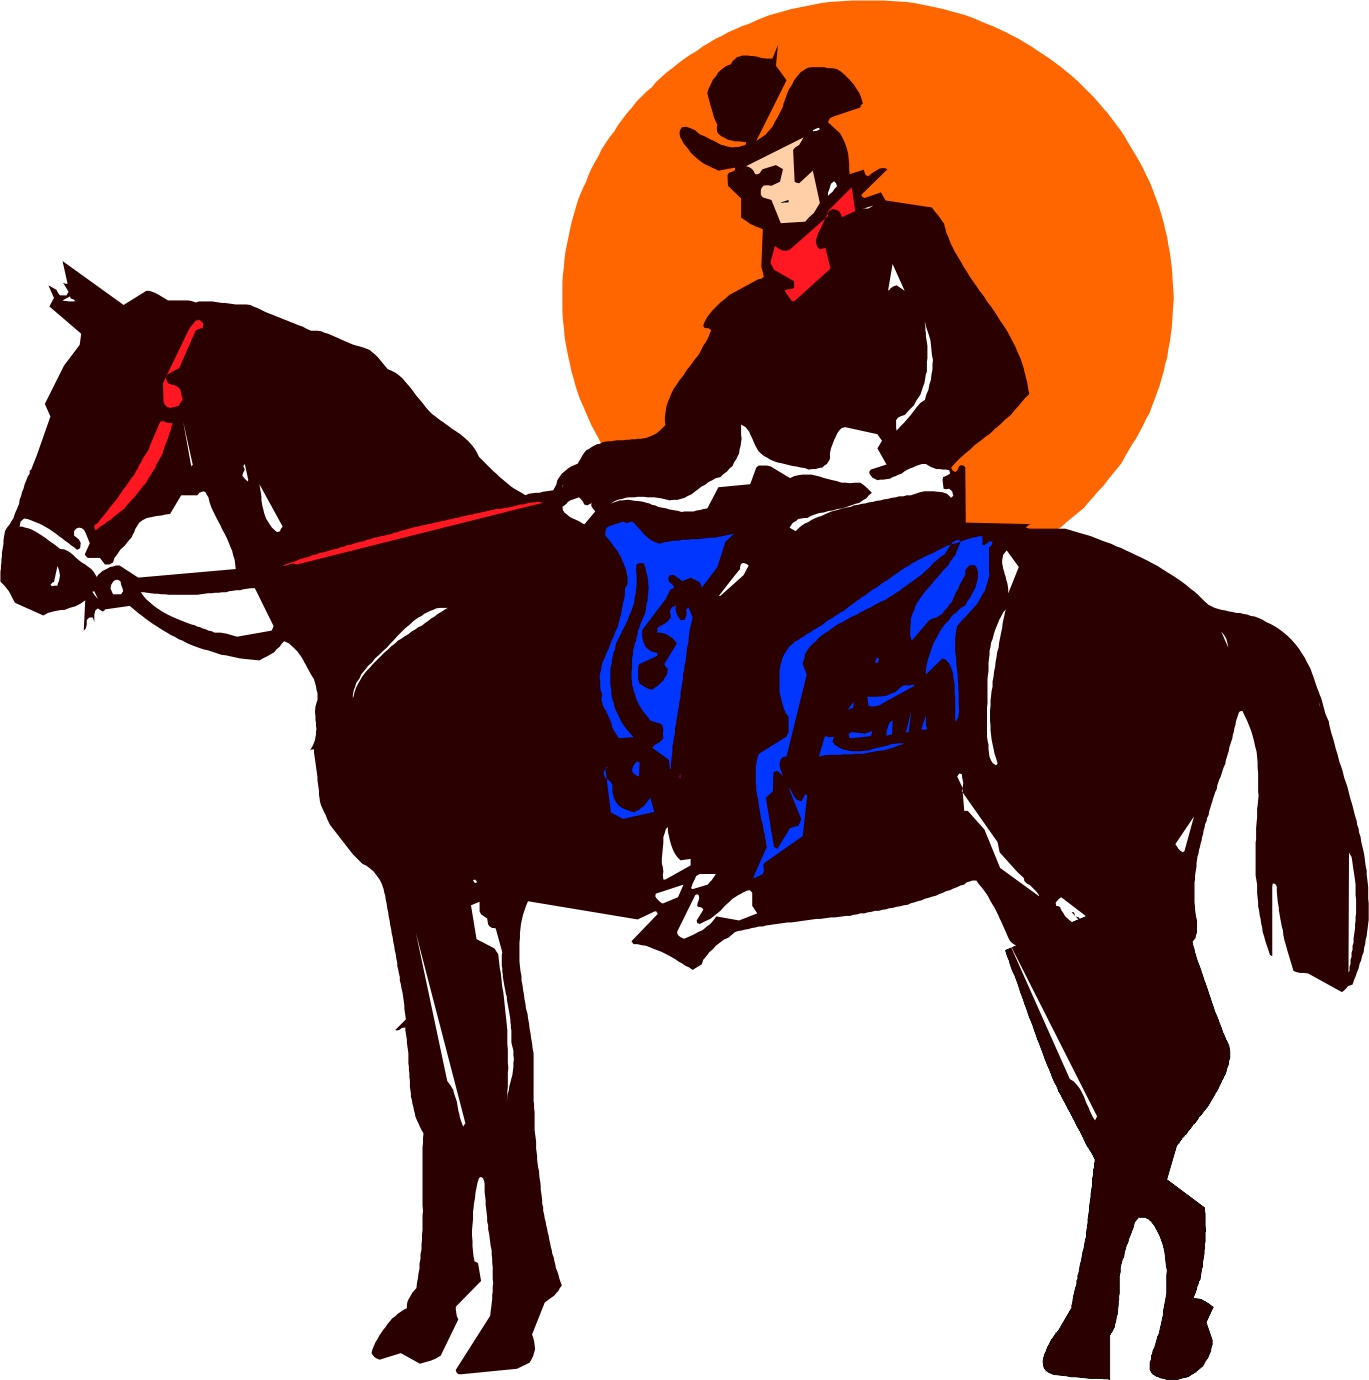 Cartoon Cowboys On Horses Images & Pictures - Becuo